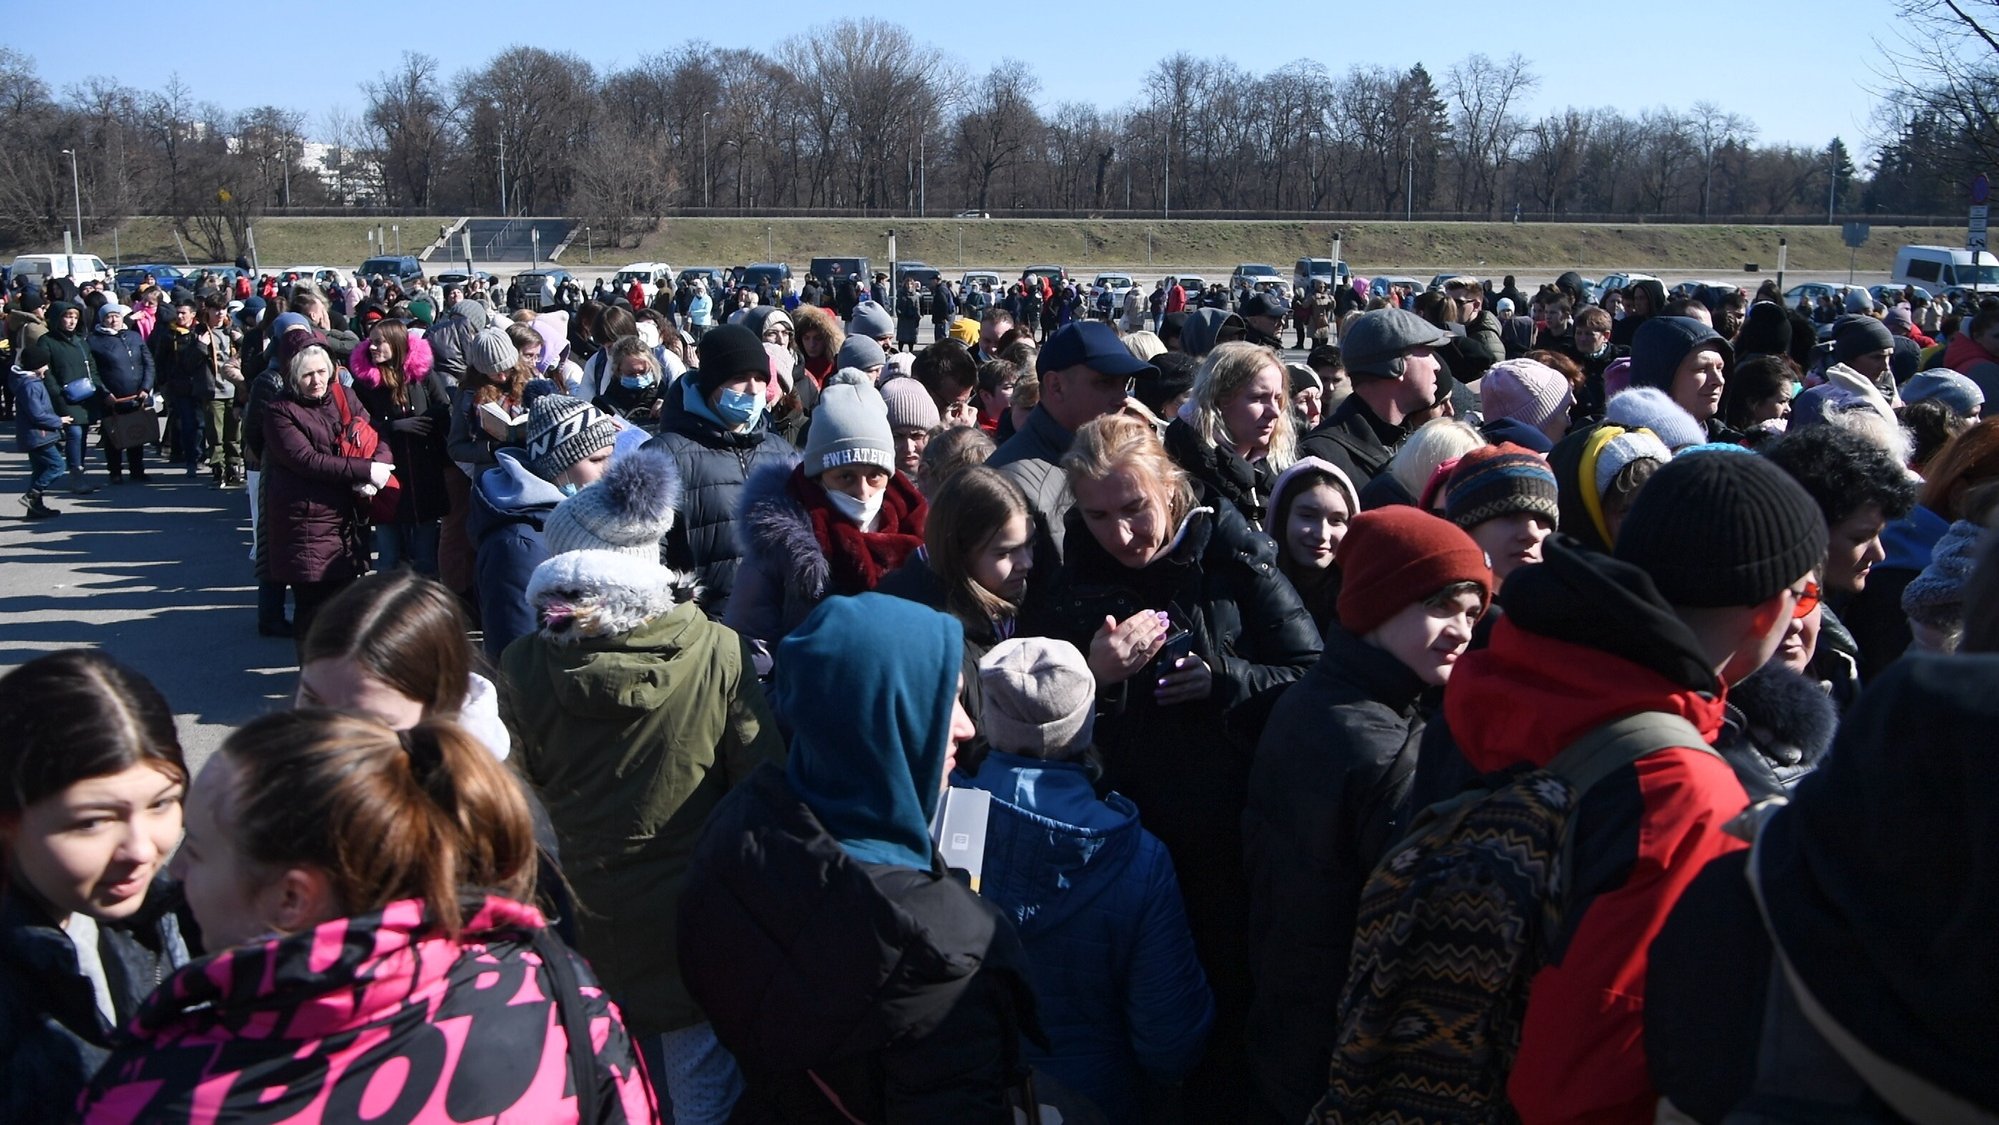 epa09837636 Refugees from Ukraine queue to the PESEL number issuance point at the National Stadium in Warsaw, Poland, 20 March 2022. Polish president Duda has signed into law an amended bill on assistance to Ukrainians fleeing the Russian invasion. Under the bill, refugees from Ukraine will receive the PESEL (Universal Electronic System for Registration of the Population) national identification number. Since 24 February, when Russia invaded Ukraine, over two million people have crossed the Polish-Ukrainian border into Poland, according to figures reported by the Border Guard on 20 March.  EPA/PIOTR NOWAK POLAND OUT